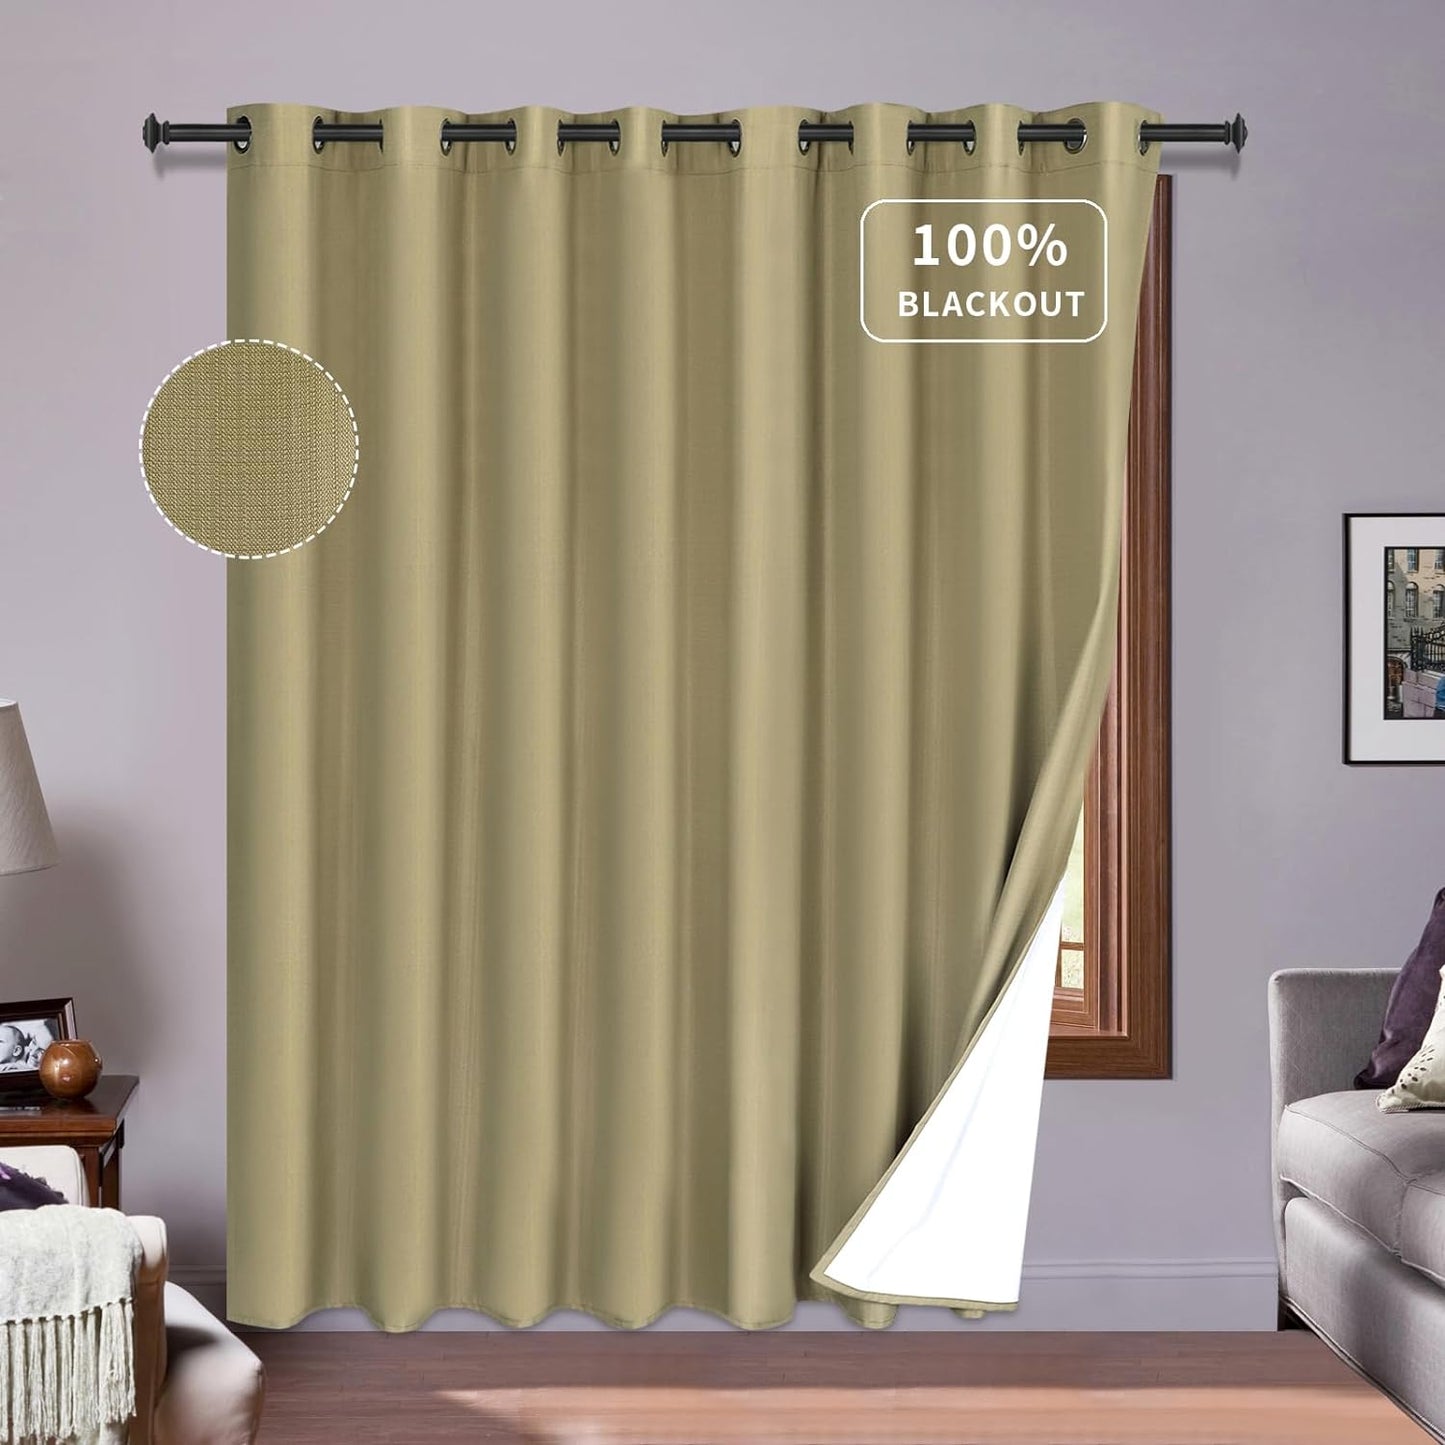 Purefit White Linen Blackout Curtains 84 Inches Long 100% Room Darkening Thermal Insulated Window Curtain Drapes for Bedroom Living Room Nursery with Anti-Rust Grommets & Energy Saving Liner, 2 Panels  PureFit Khaki 100"W X 84"L 